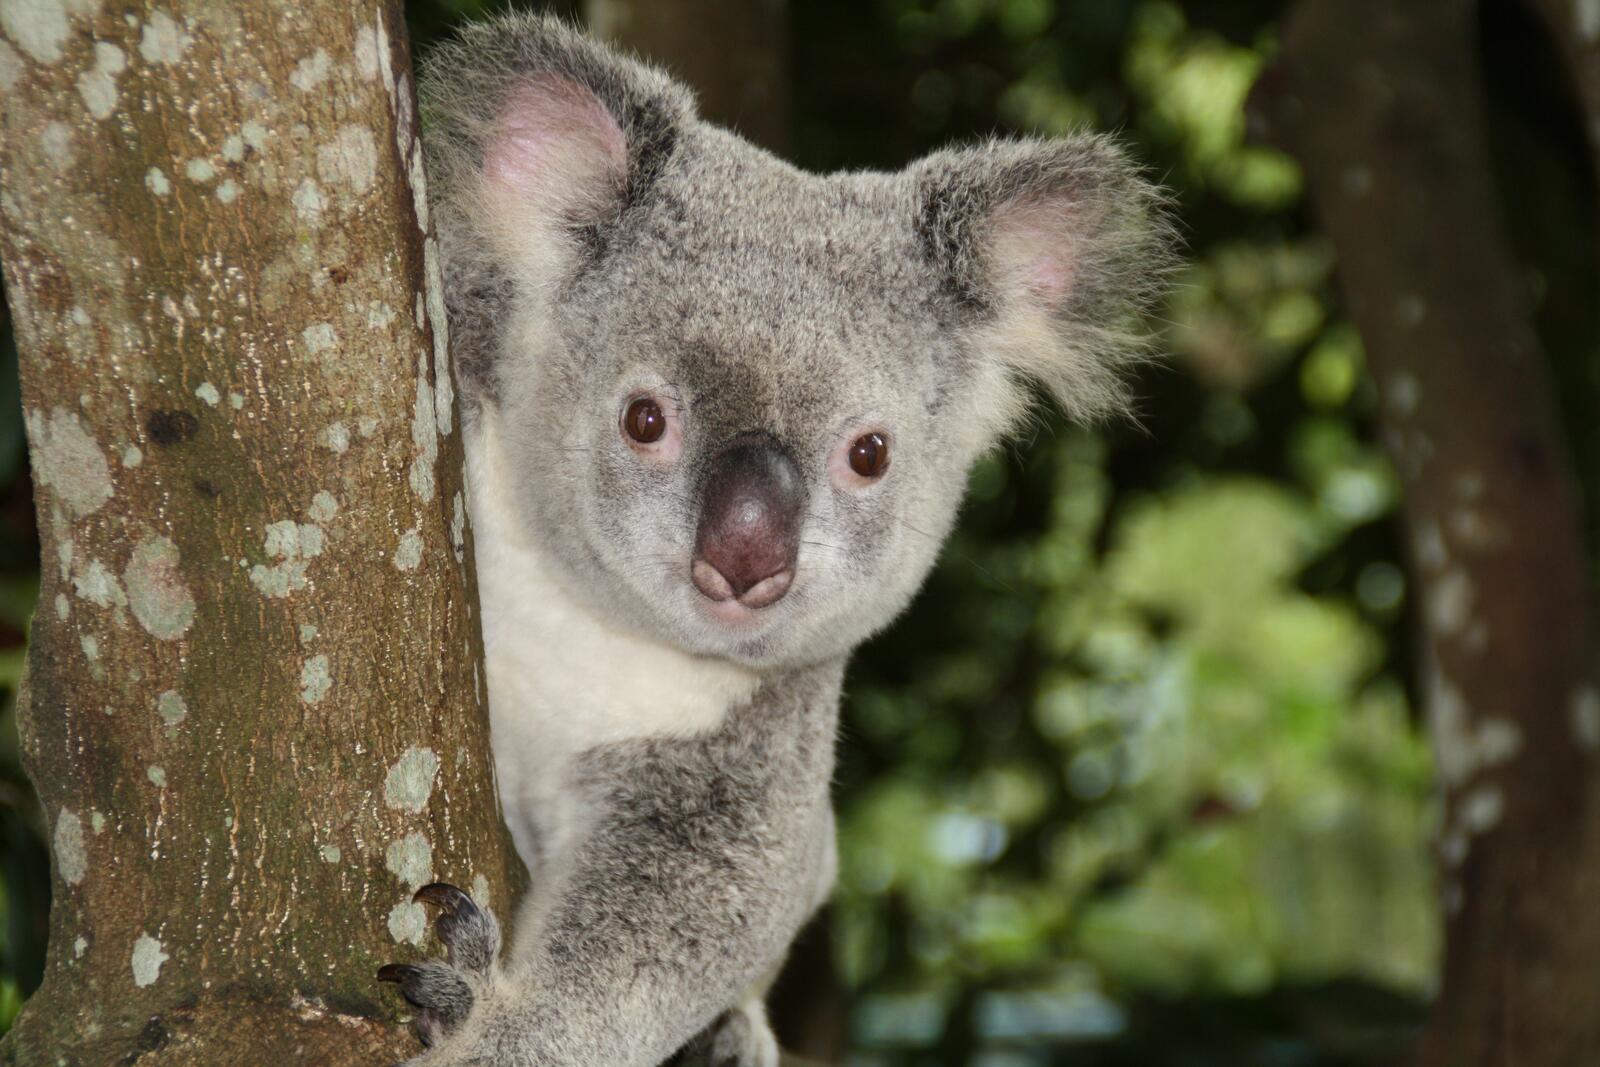 Free photo A gray koala stares at a photographer and crawls up a tree in Australia